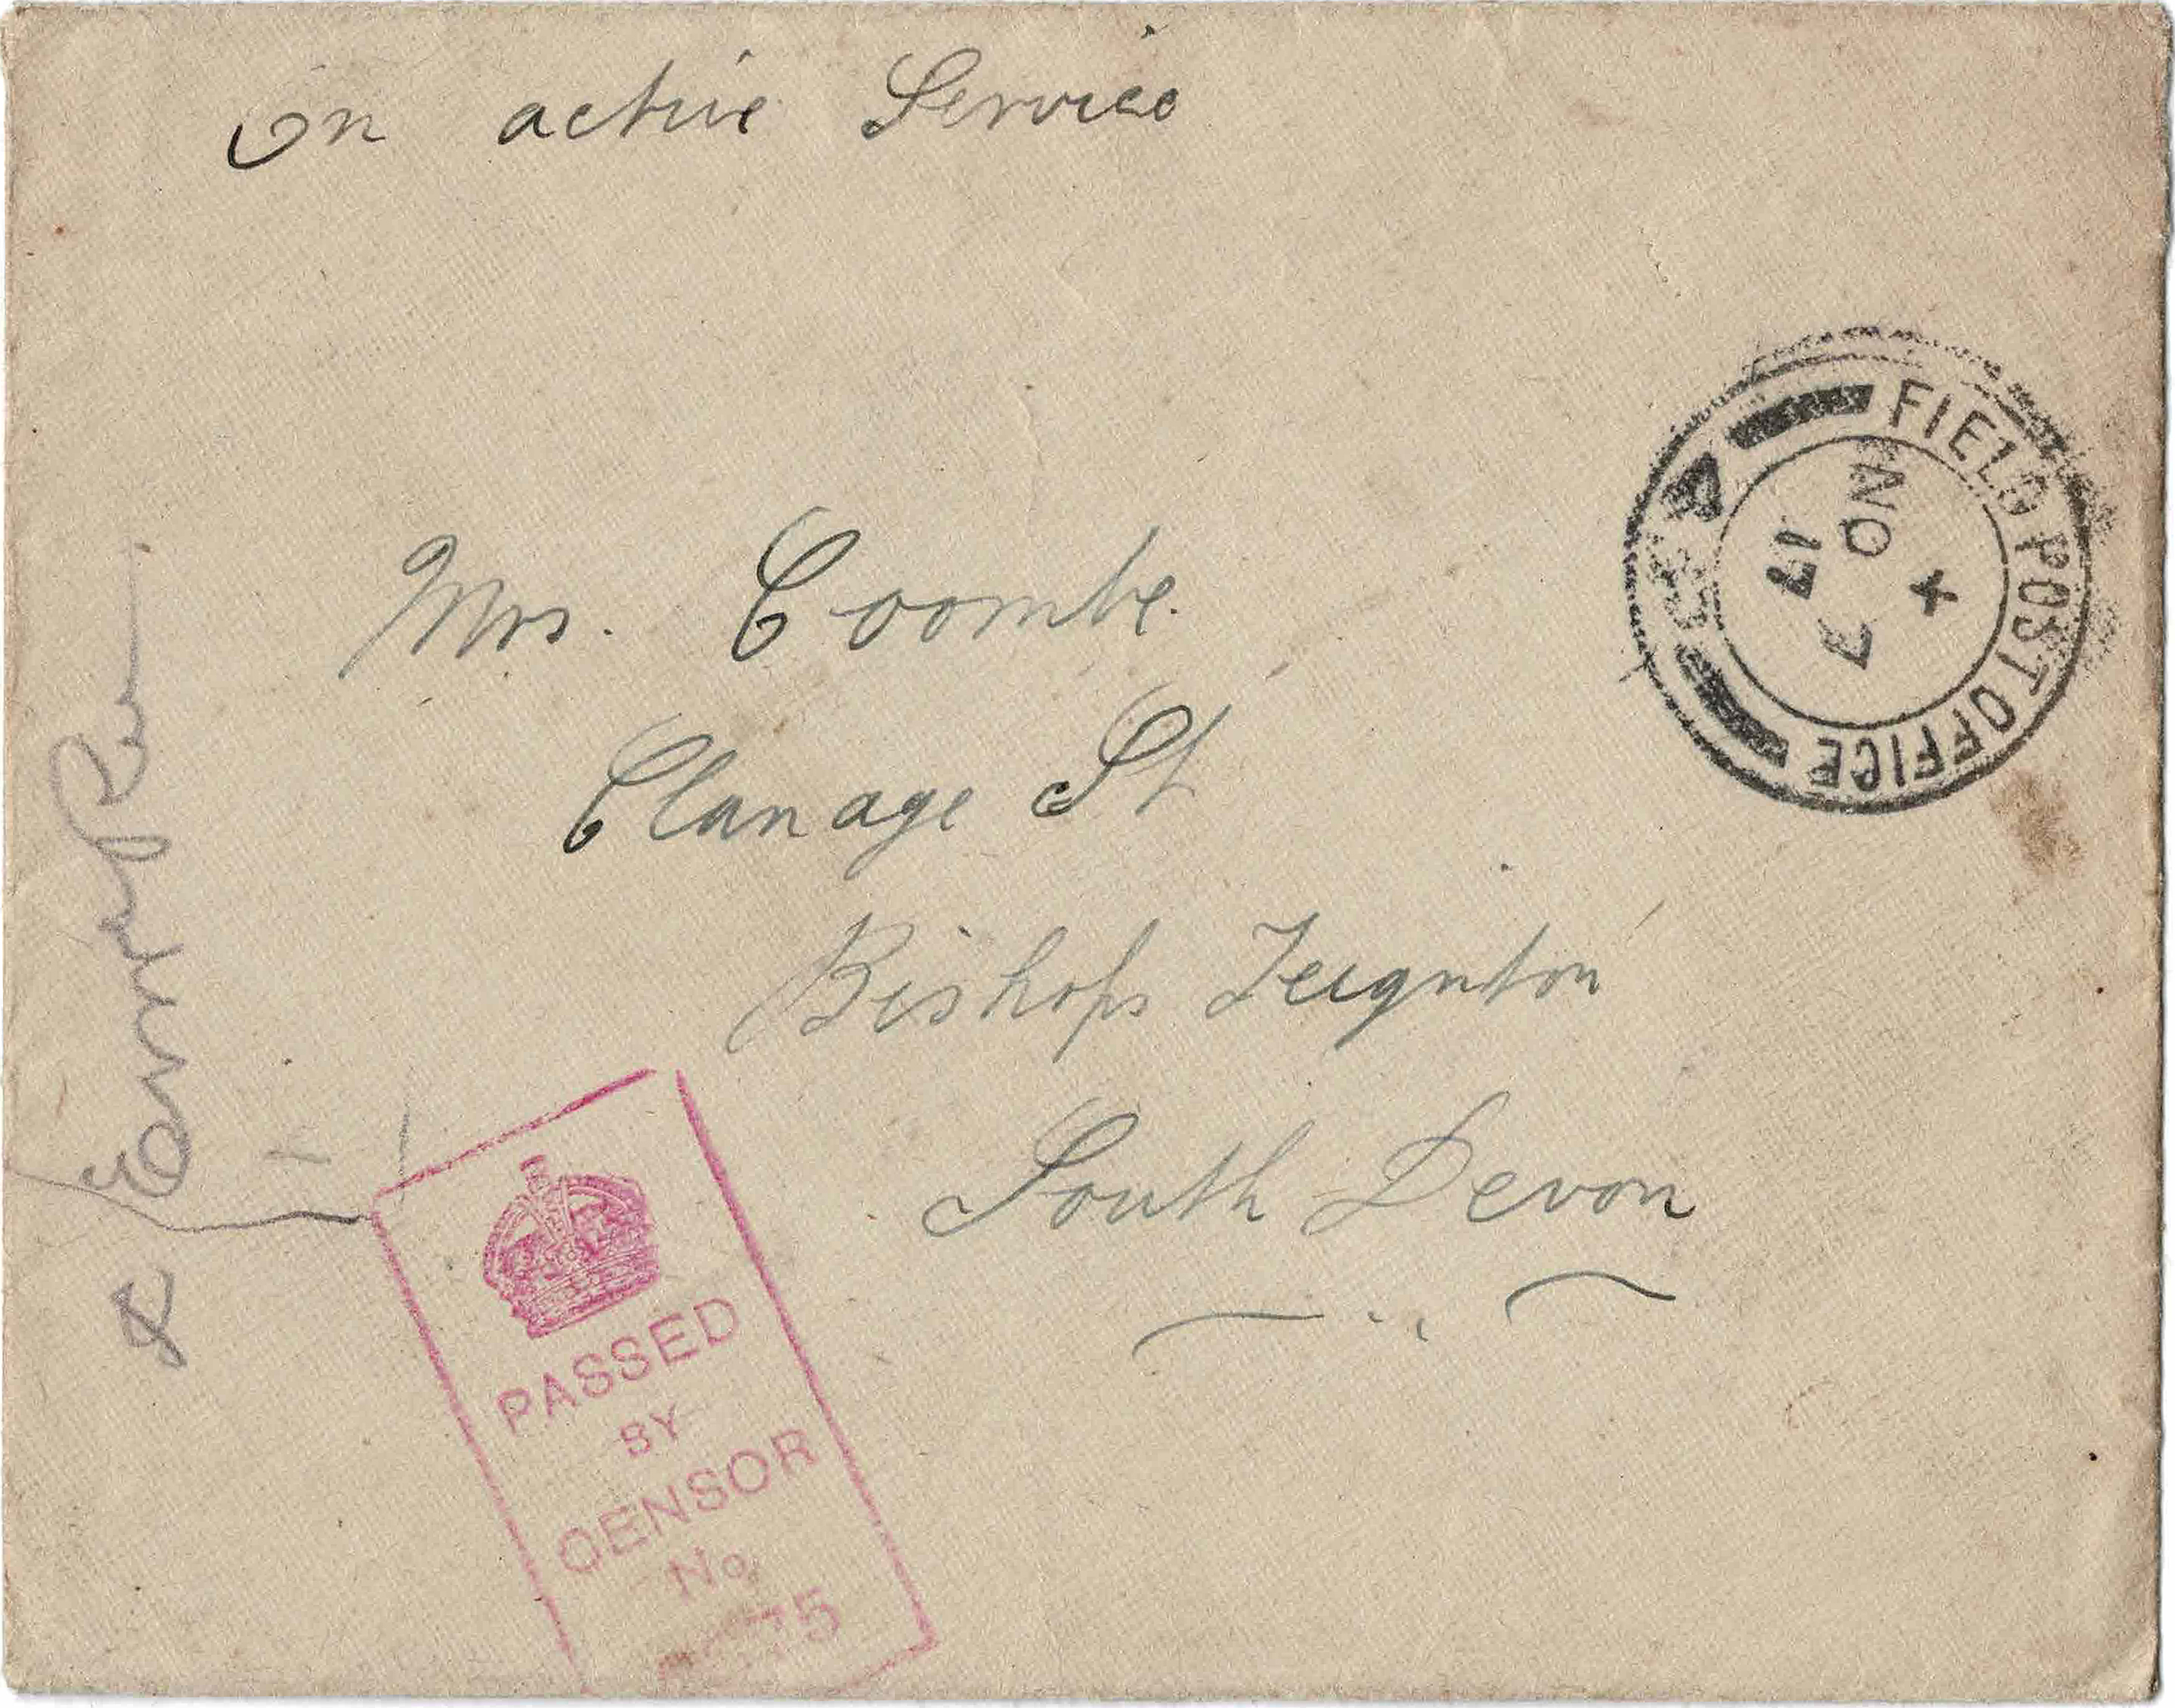 Envelope addressed to Mrs Coombe, contains letter